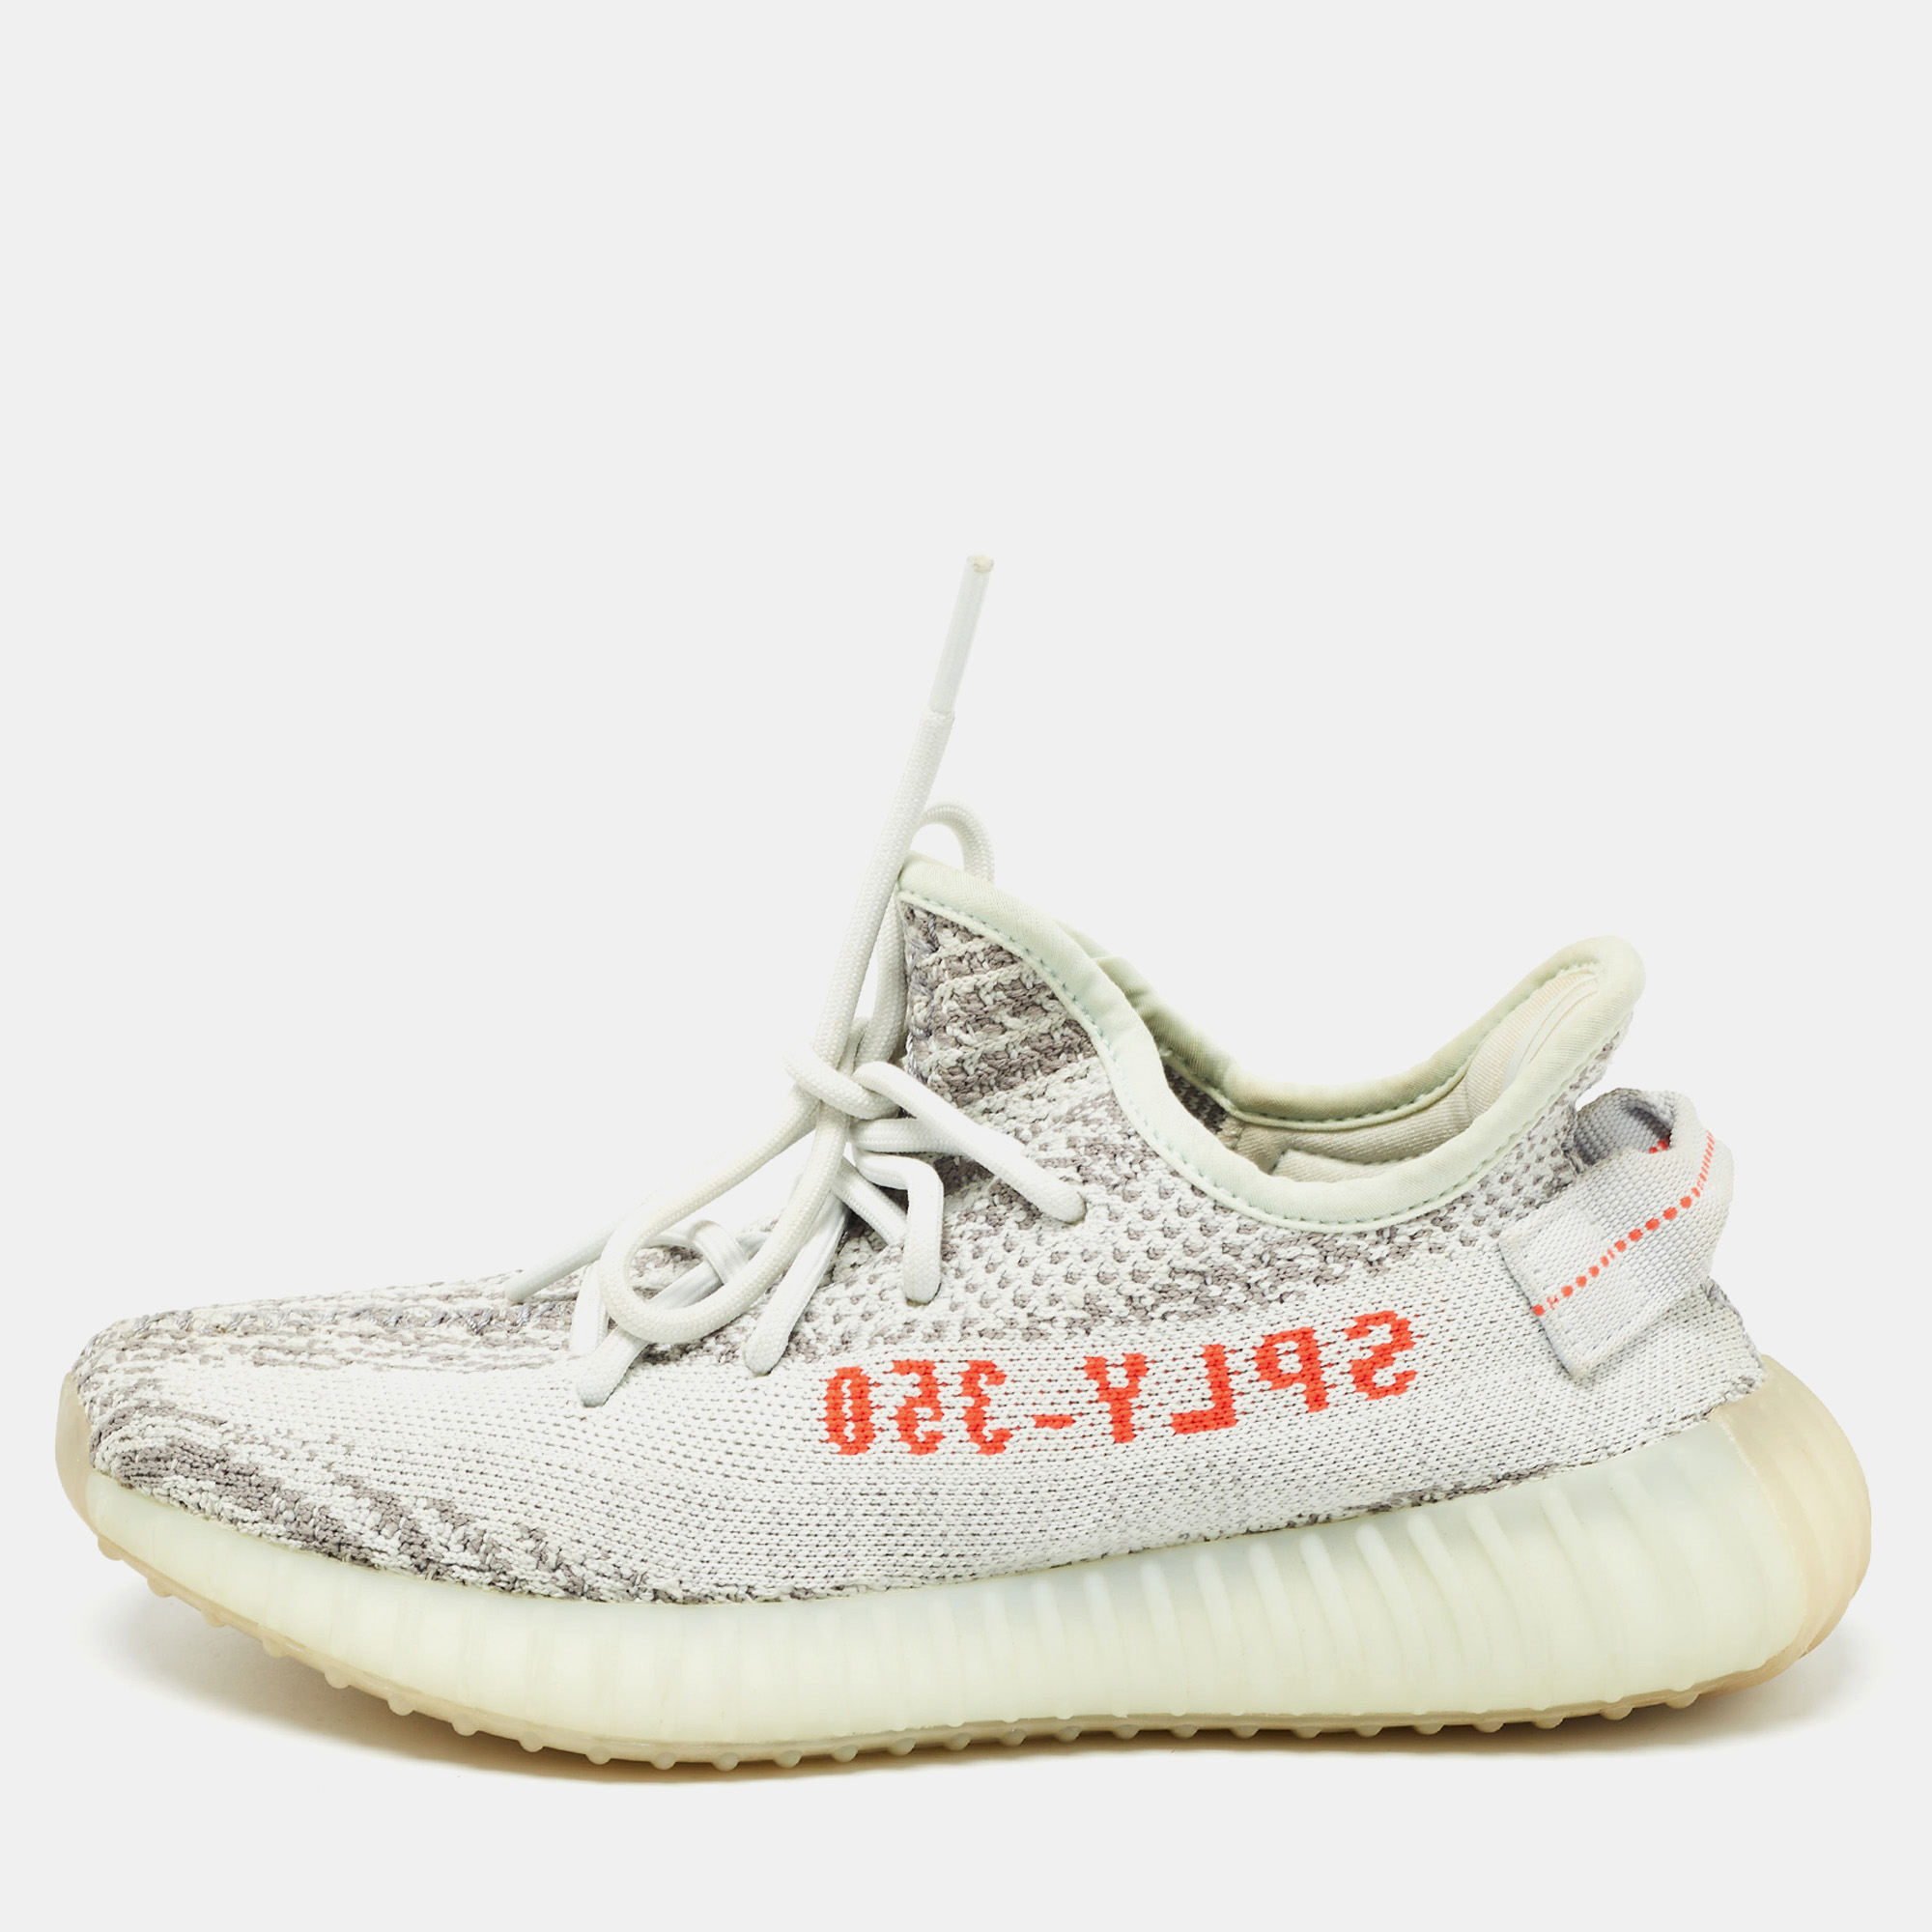 Elevate your footwear game with these Yeezy x adidas sneakers. Combining well loved elements and unmatched comfort these sneakers will look great on your feet.